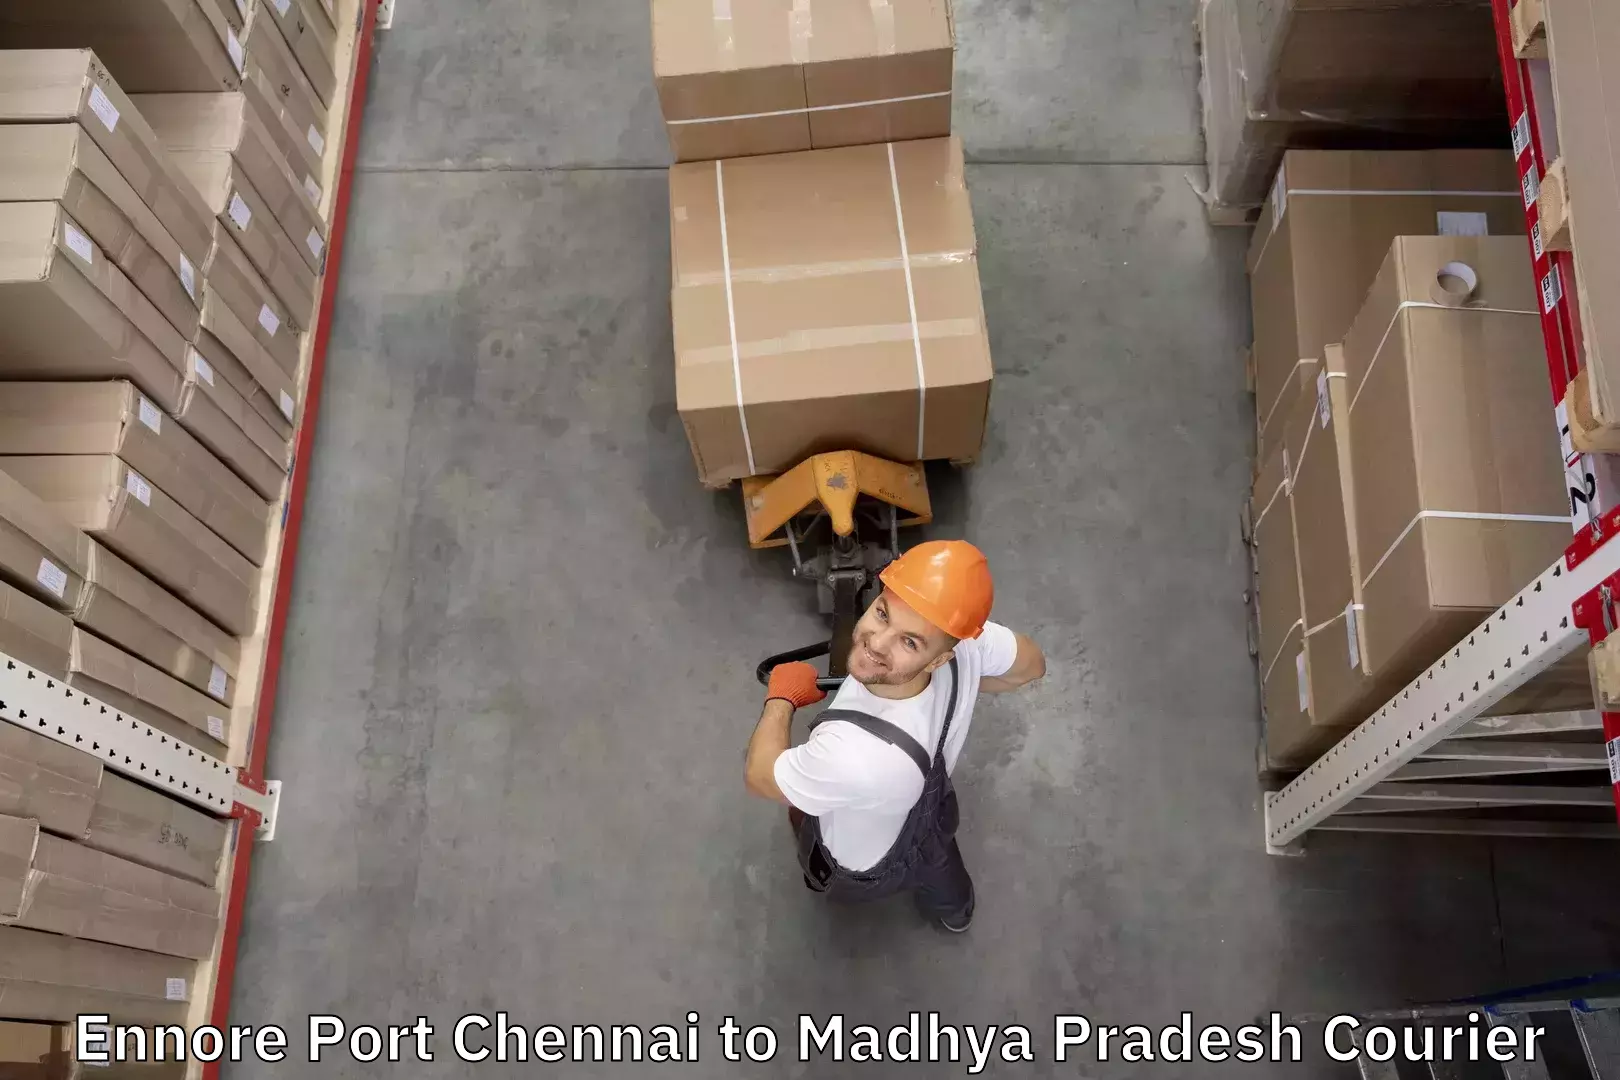 Door to door luggage delivery Ennore Port Chennai to Sohagi